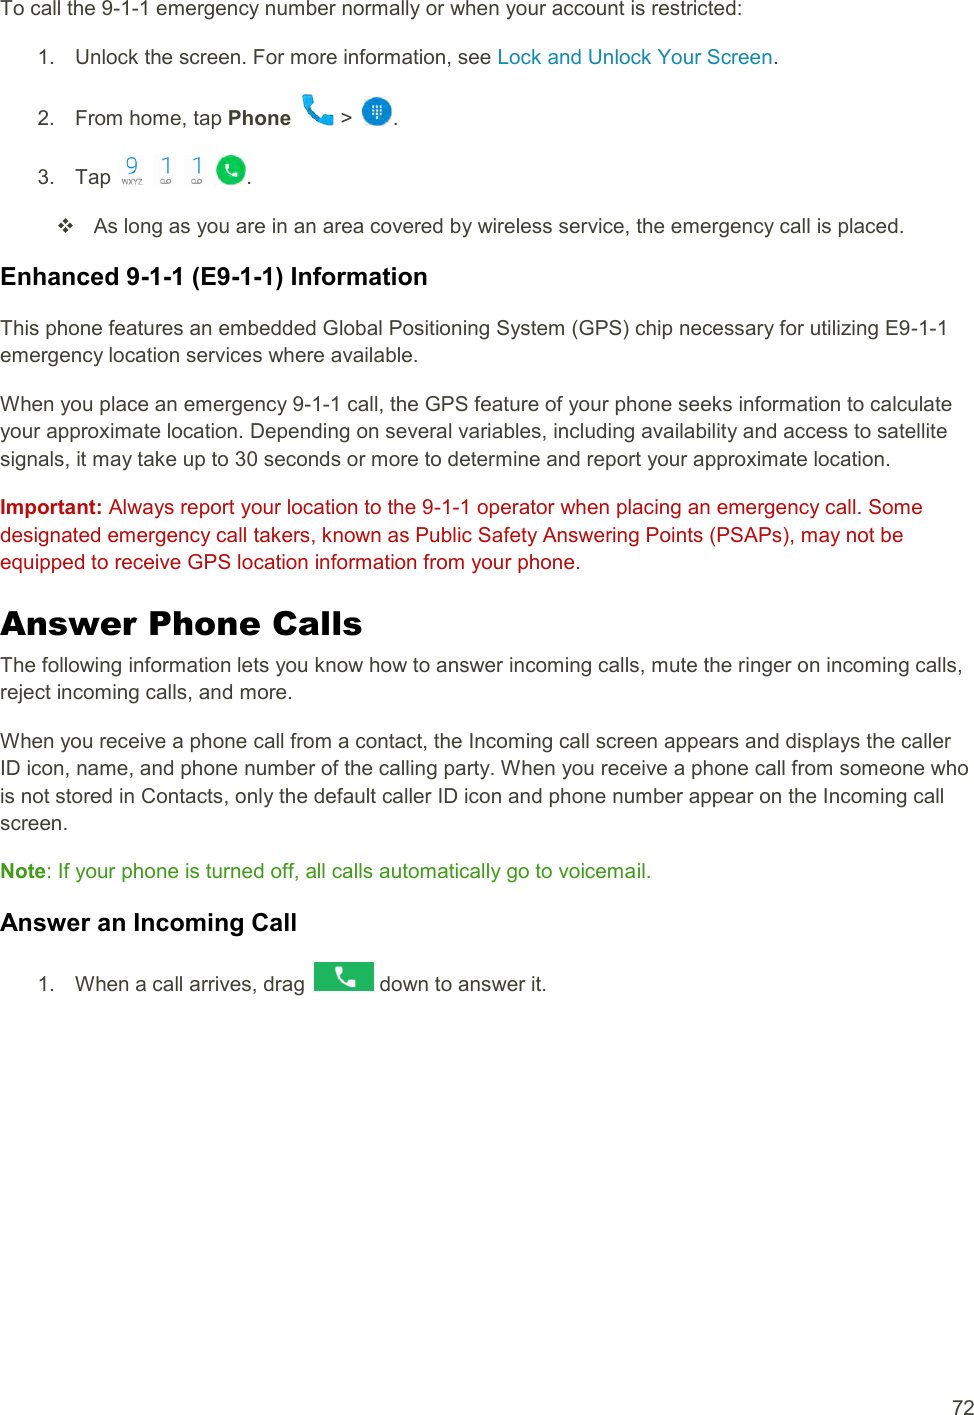  72 To call the 9-1-1 emergency number normally or when your account is restricted: 1.  Unlock the screen. For more information, see Lock and Unlock Your Screen. 2.  From home, tap Phone   &gt;  . 3.  Tap        .   As long as you are in an area covered by wireless service, the emergency call is placed. Enhanced 9-1-1 (E9-1-1) Information This phone features an embedded Global Positioning System (GPS) chip necessary for utilizing E9-1-1 emergency location services where available. When you place an emergency 9-1-1 call, the GPS feature of your phone seeks information to calculate your approximate location. Depending on several variables, including availability and access to satellite signals, it may take up to 30 seconds or more to determine and report your approximate location. Important: Always report your location to the 9-1-1 operator when placing an emergency call. Some designated emergency call takers, known as Public Safety Answering Points (PSAPs), may not be equipped to receive GPS location information from your phone. Answer Phone Calls The following information lets you know how to answer incoming calls, mute the ringer on incoming calls, reject incoming calls, and more. When you receive a phone call from a contact, the Incoming call screen appears and displays the caller ID icon, name, and phone number of the calling party. When you receive a phone call from someone who is not stored in Contacts, only the default caller ID icon and phone number appear on the Incoming call screen. Note: If your phone is turned off, all calls automatically go to voicemail. Answer an Incoming Call 1.  When a call arrives, drag   down to answer it. 